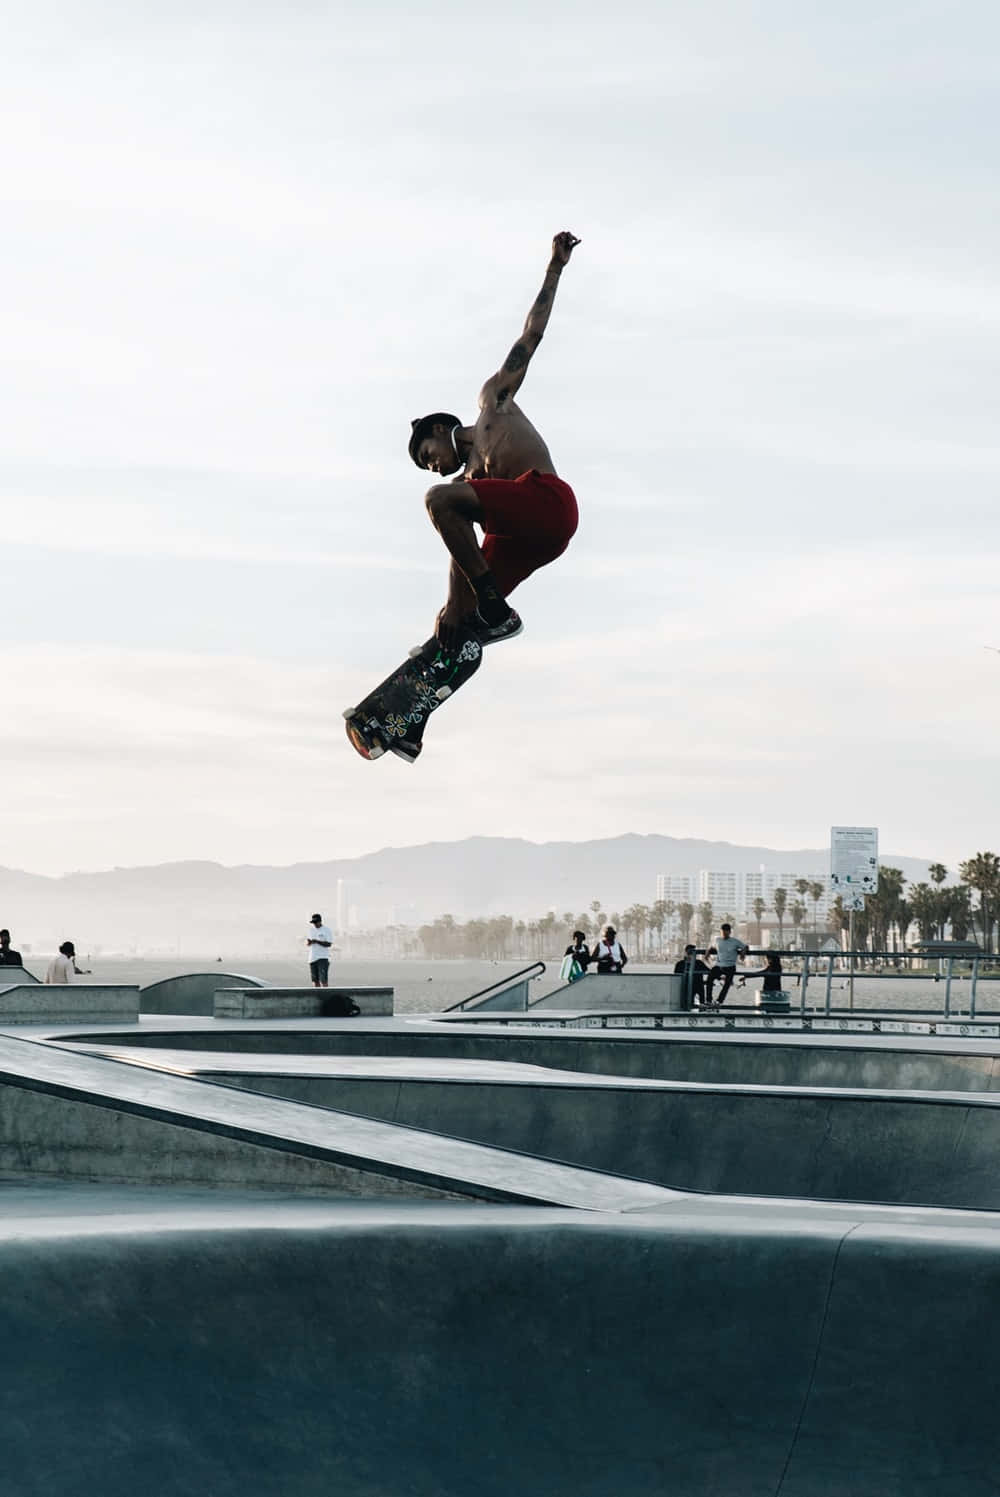 A Skateboarder In The Air Wallpaper